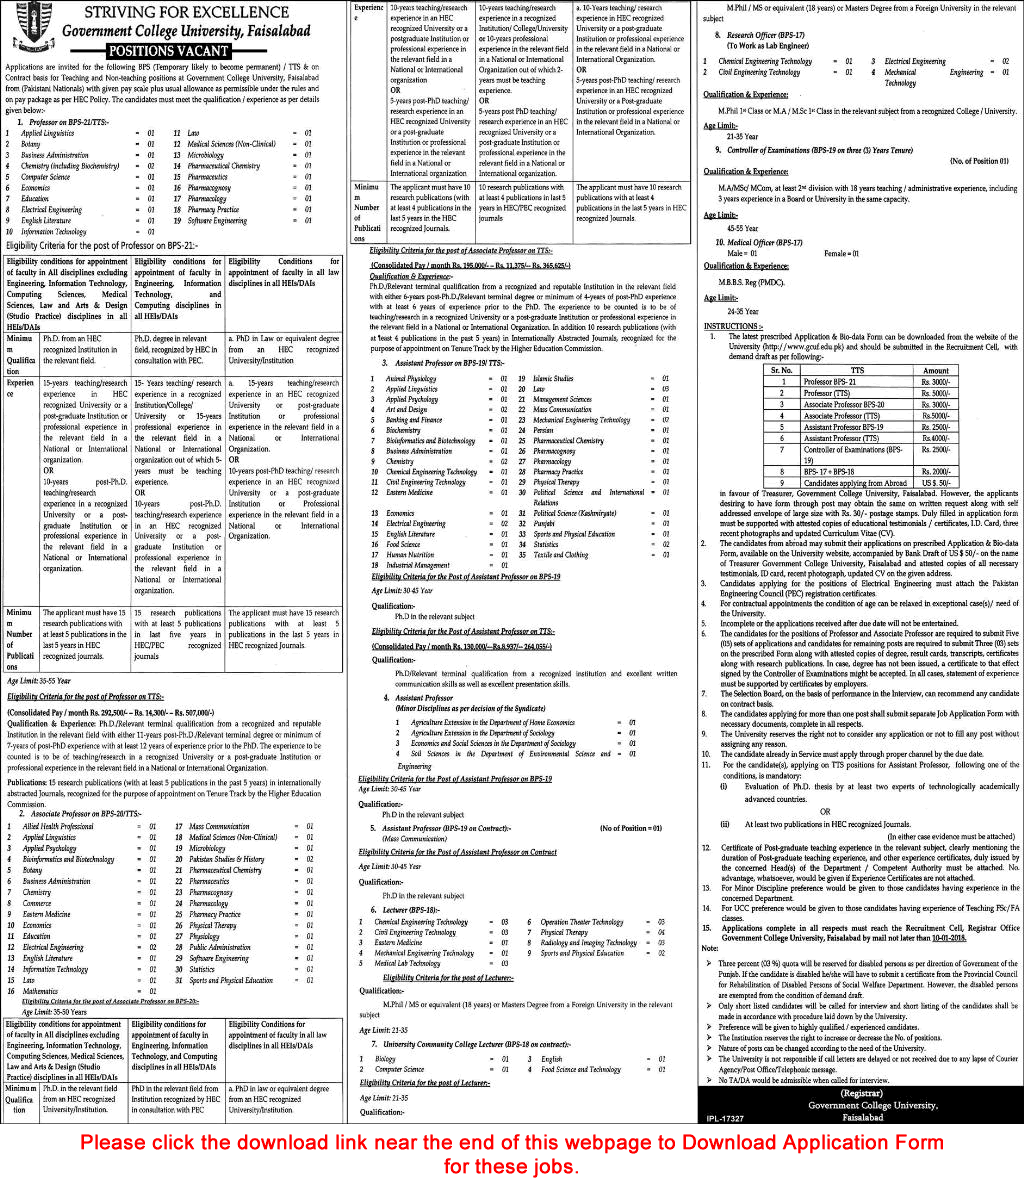 GC University Faisalabad Jobs December 2017 / 2018 Application Form Teaching Faculty & Others Latest